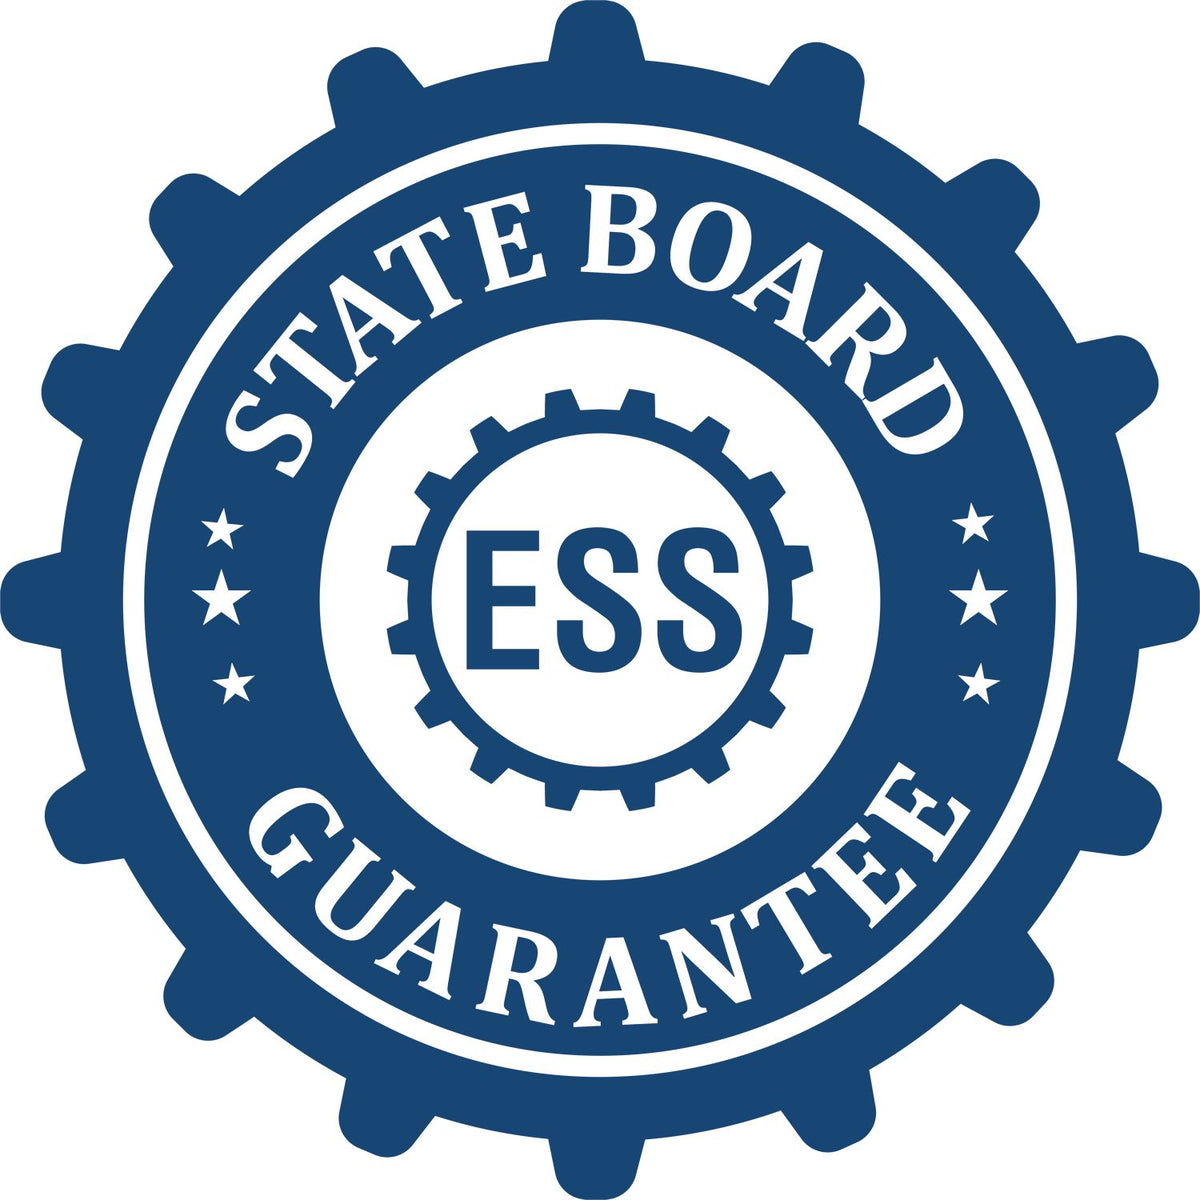 An emblem in a gear shape illustrating a state board guarantee for the Georgia Desk Architect Embossing Seal product.